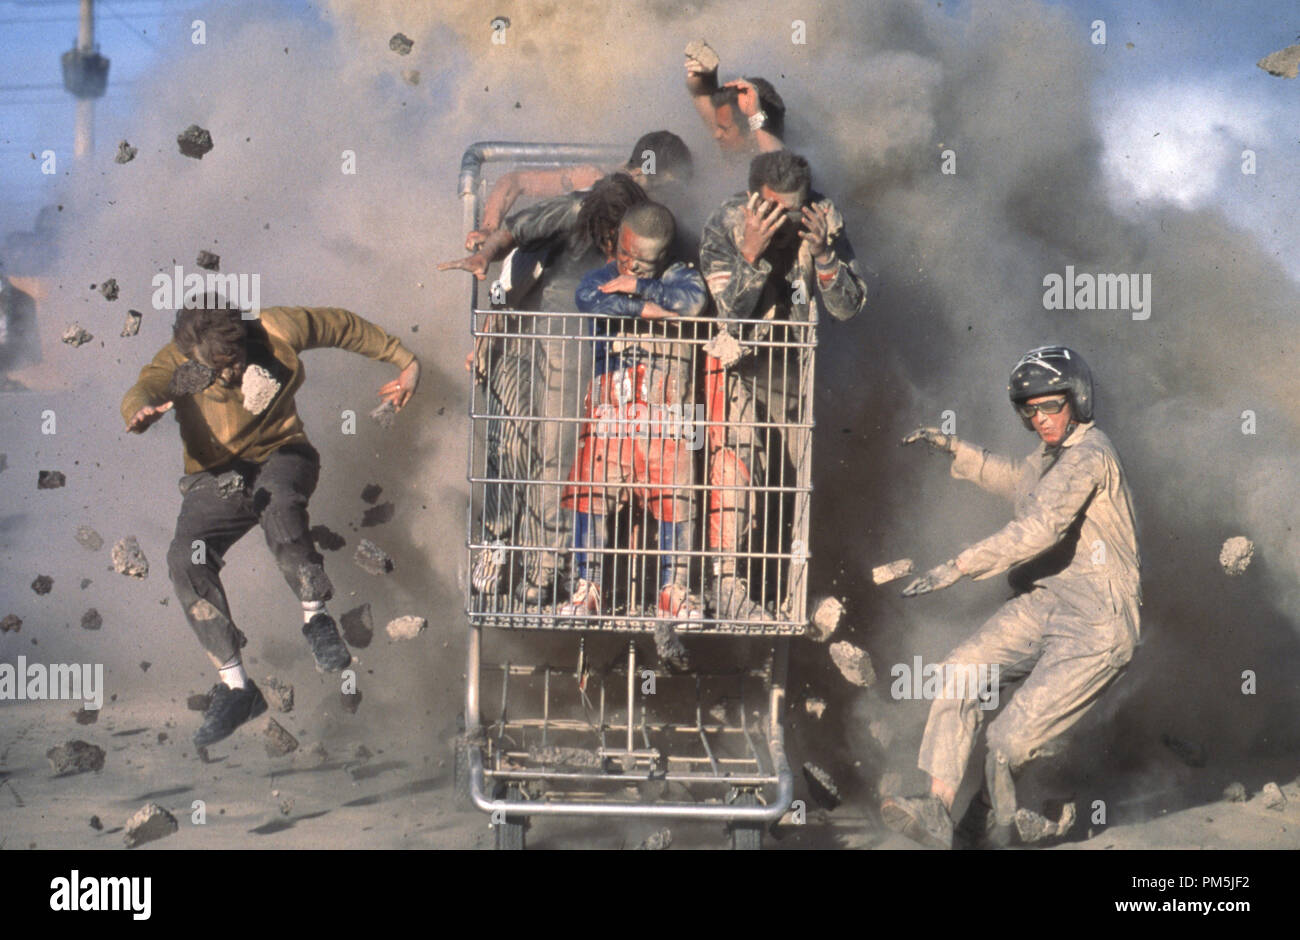 Film Still / Publicity Still from 'Jackass: The Movie' (left) Dave England, (right) Ehren McGhehey, (in shopping cart, beginning center clockwise) Jason 'Wee Man' Acuna, Bam Margera, Ryan Dunn, Steve-O, Chris Pontius, and Johnny Knoxville © 2002 MTV Films Stock Photo